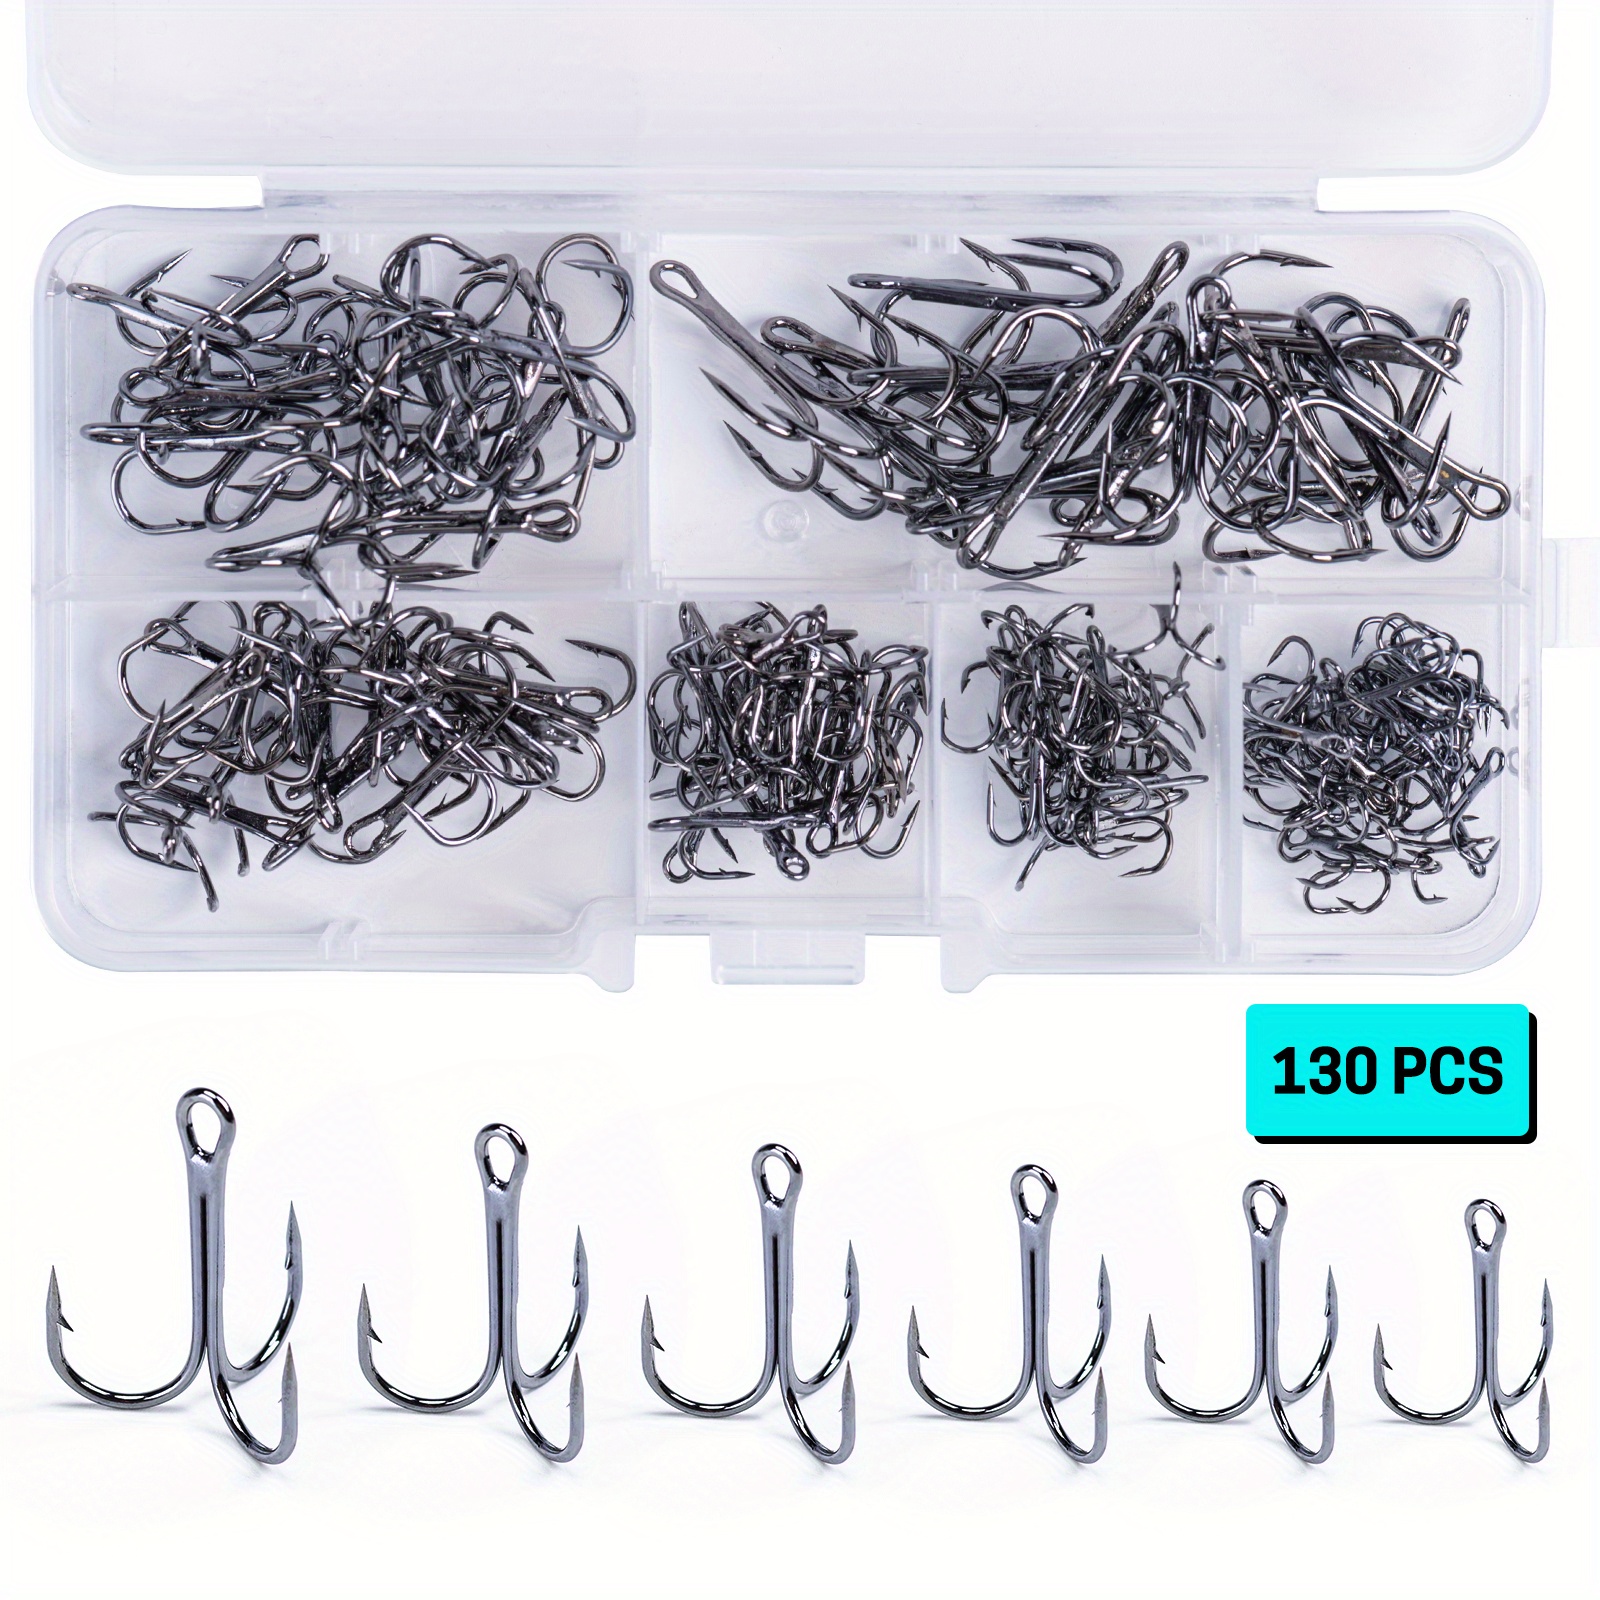 * 130pcs 6sizes Treble Fishing Hooks Set, Carbon Steel Barbed Triple Hook  With Tackle Box, Anchor Hook Sea Hook Three Claw Anchor Hook